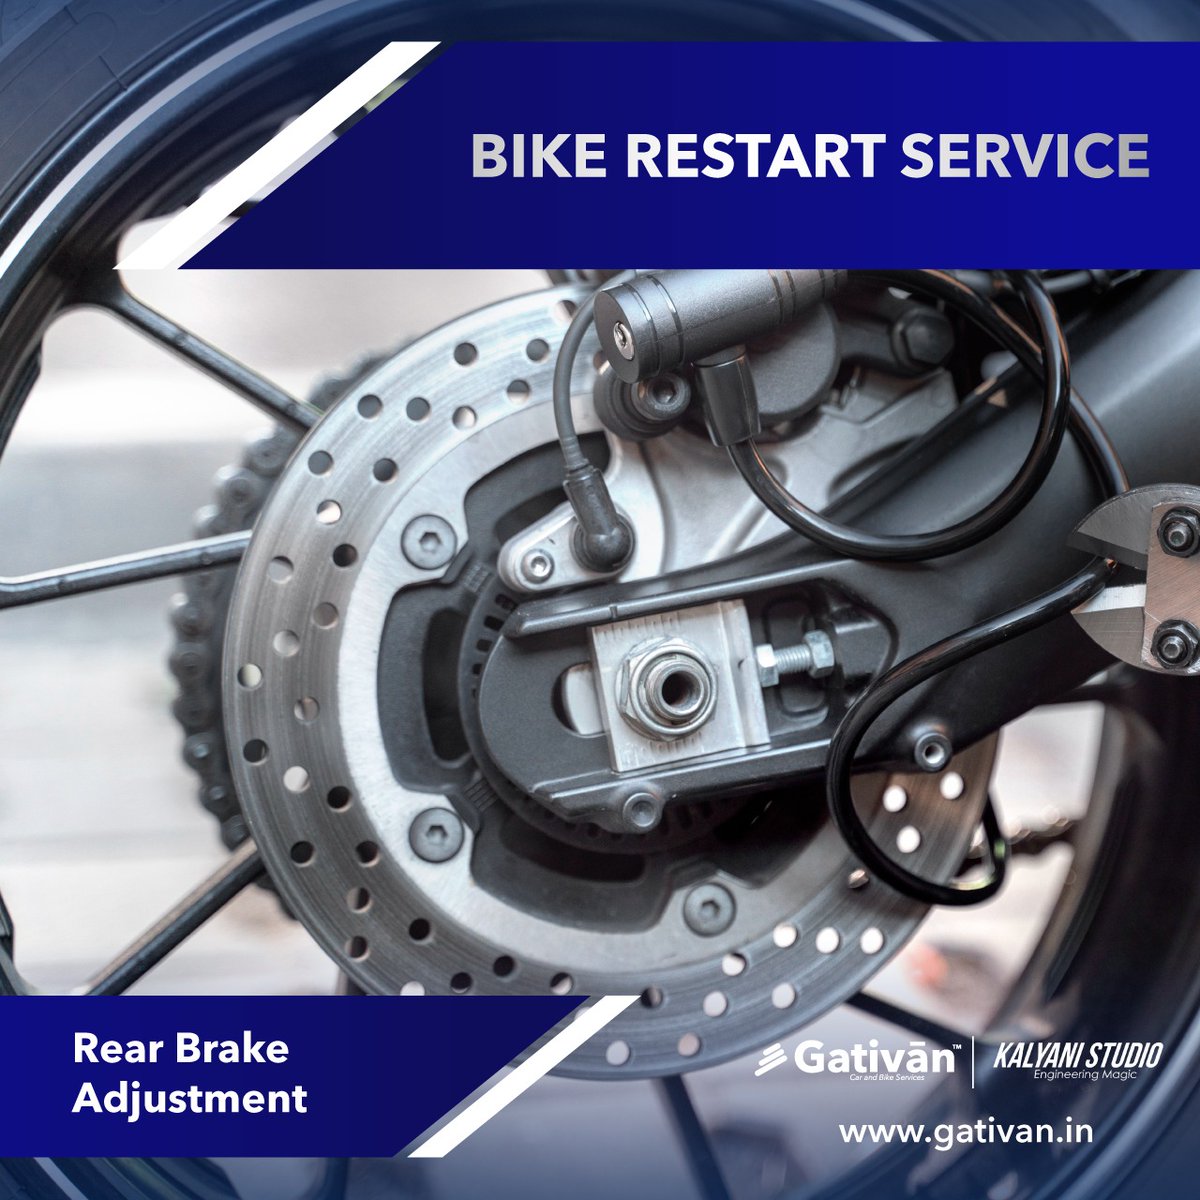 Put the brakes on your worries with the help of our skilled technicians who fine-tune your brake system, ensuring optimal performance. 

Visit gativan.in or contact 8263090692 today!  
.
.
.
#Gativan #AutoService #bikeservice #bikerestartservice